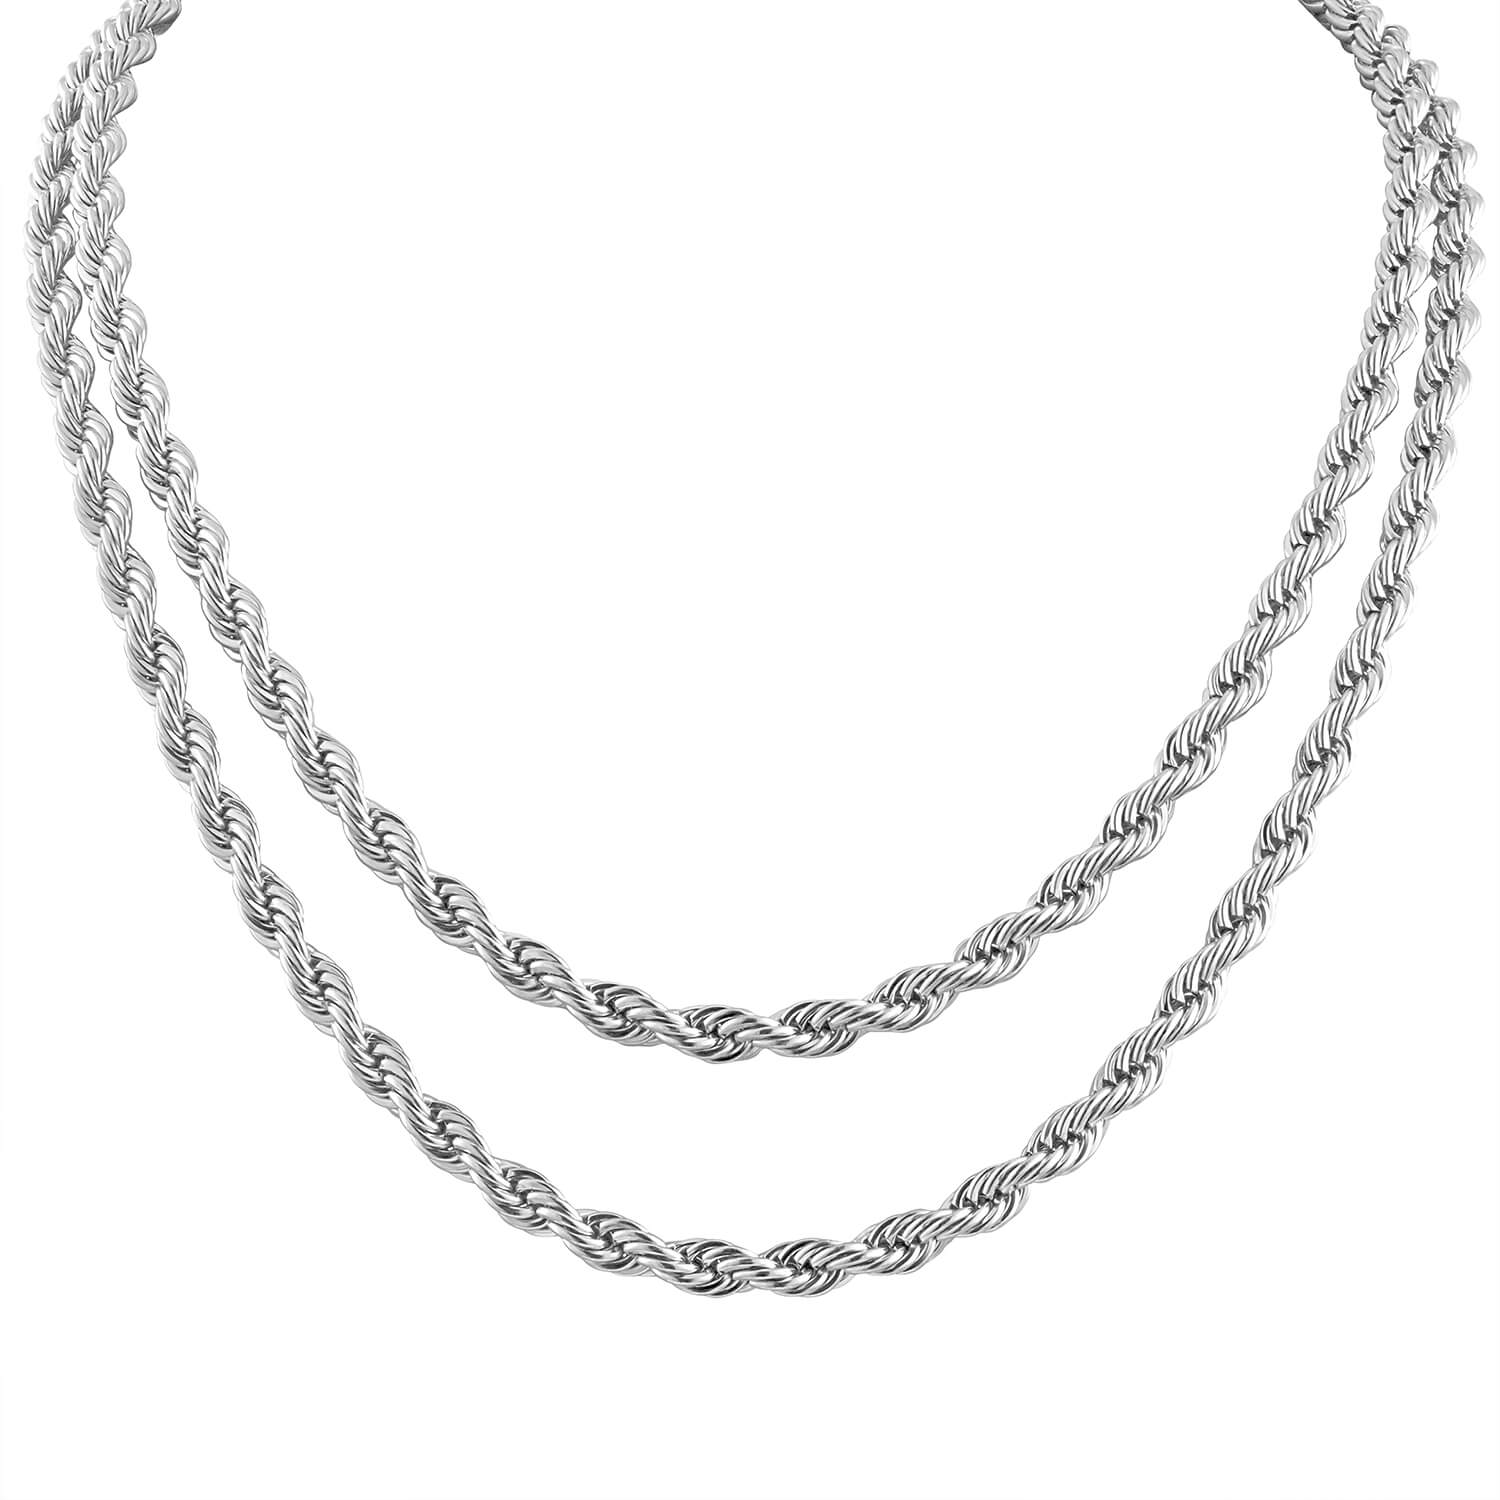 Heirloom Bold Convertible Necklace